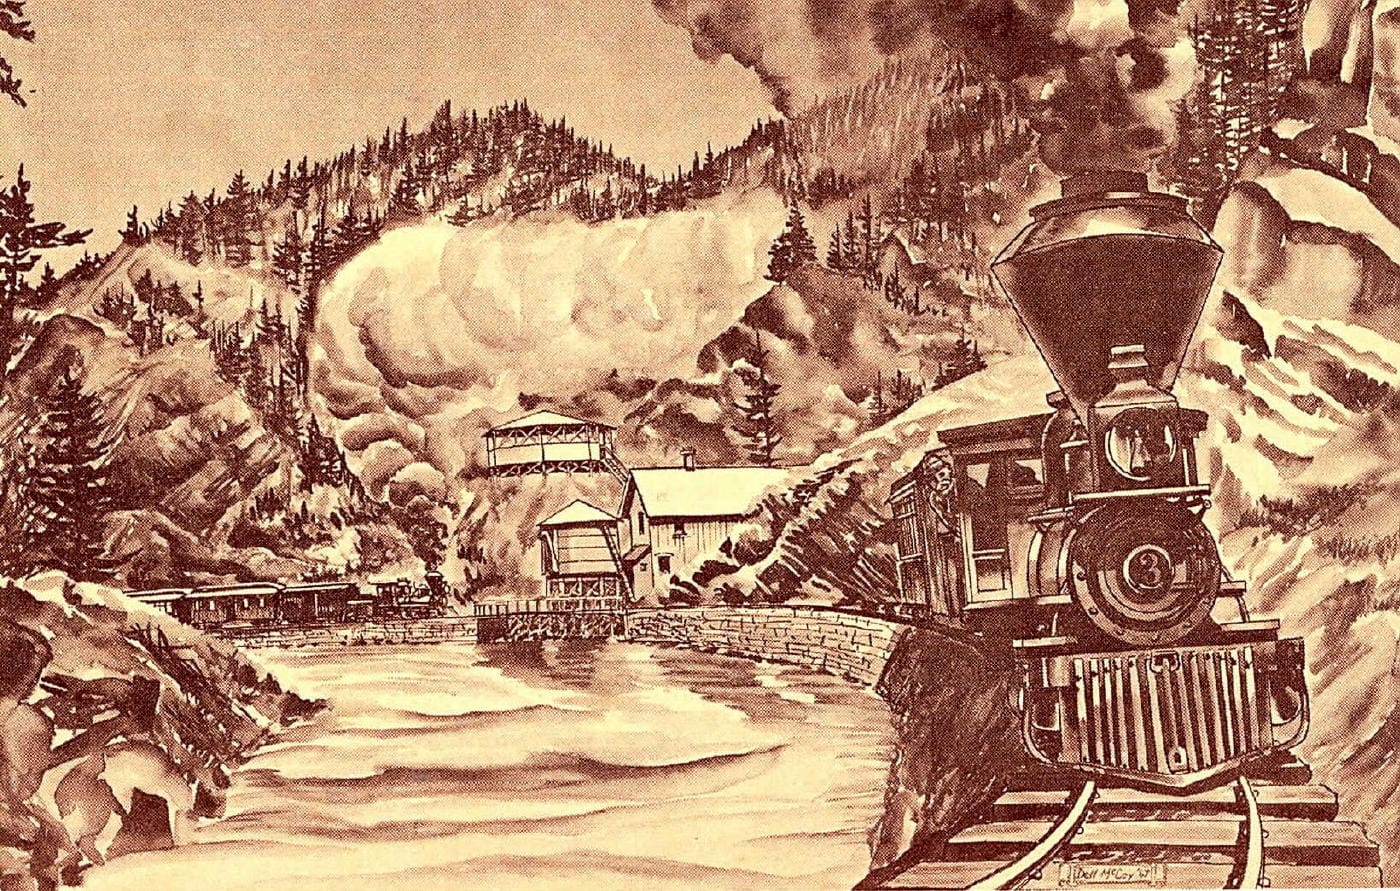 Tan-colored illustration showing engine #3 under steam with the Beaver Brook pavilion and a water tower in the background.